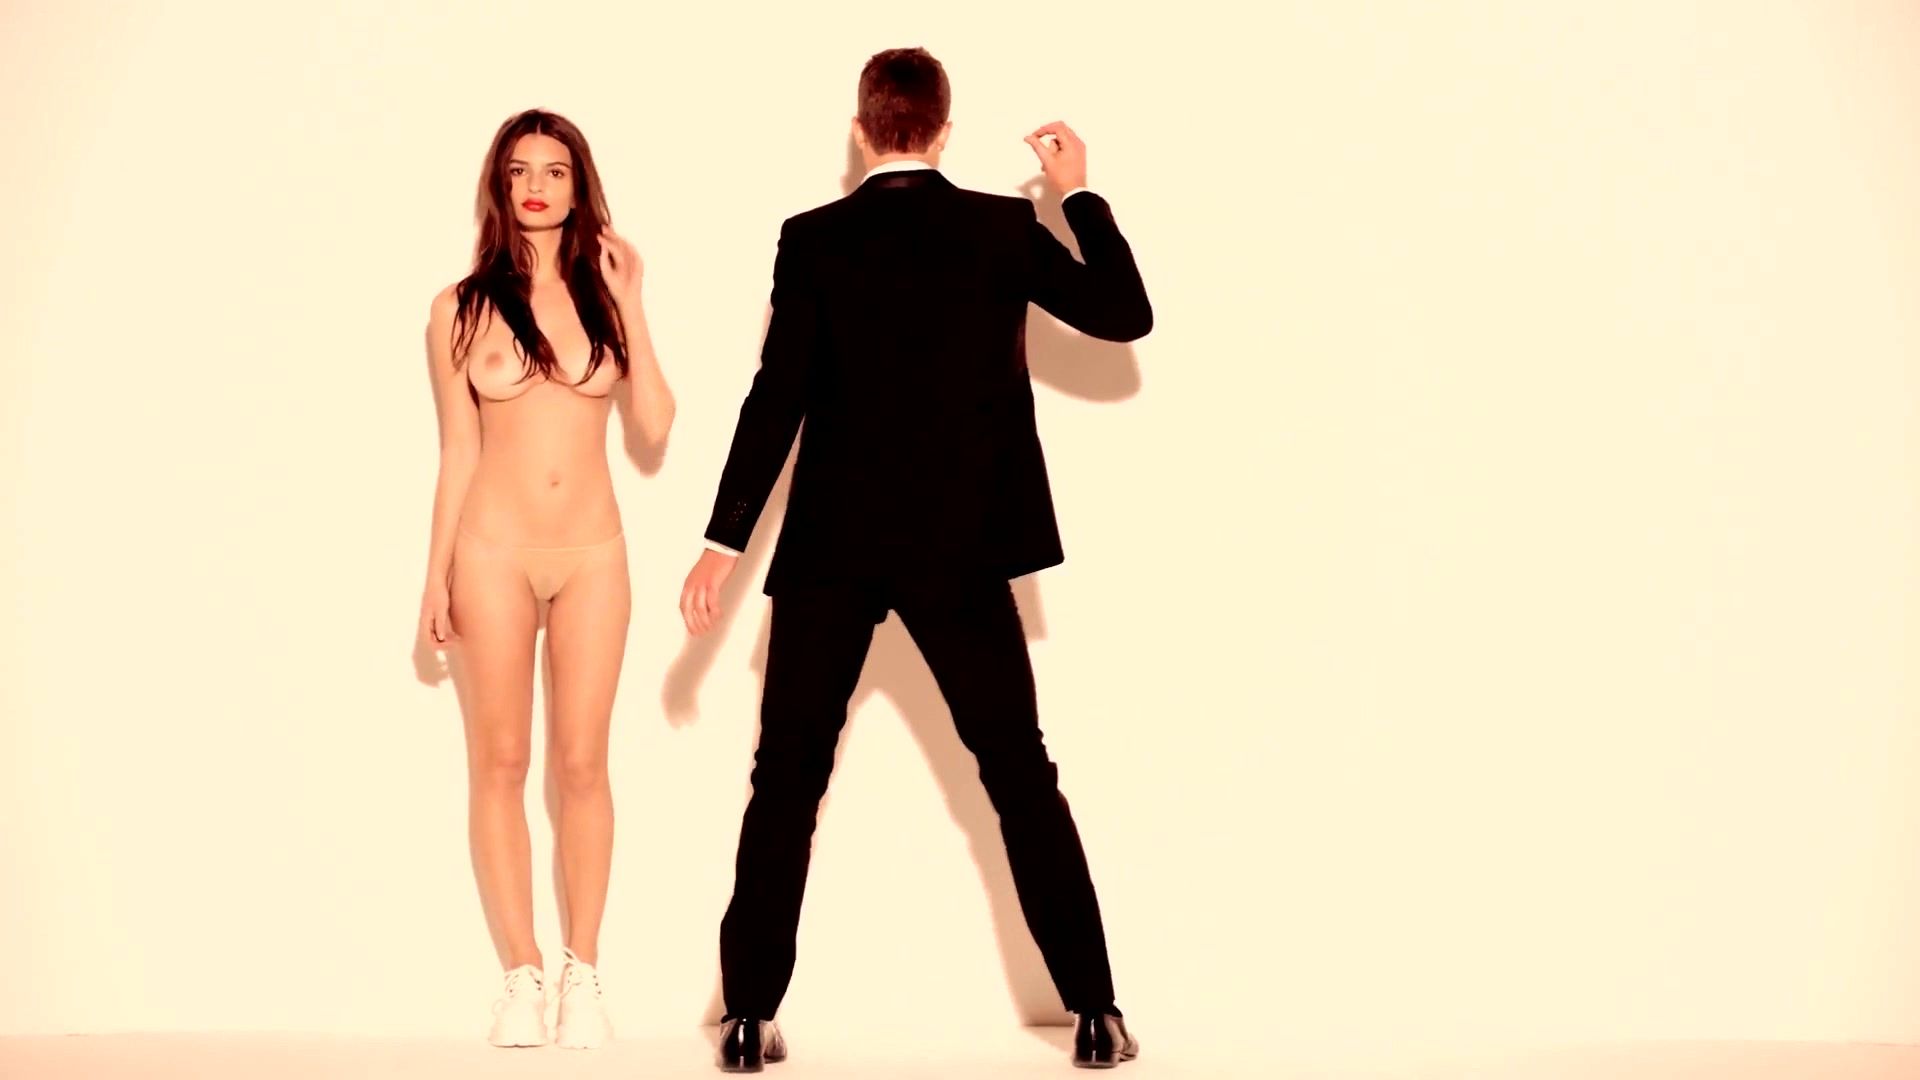 Cumfacial Topless actress Emily Ratajkowski - Blurred lines (Uncensored with Nude Models Version) Fux